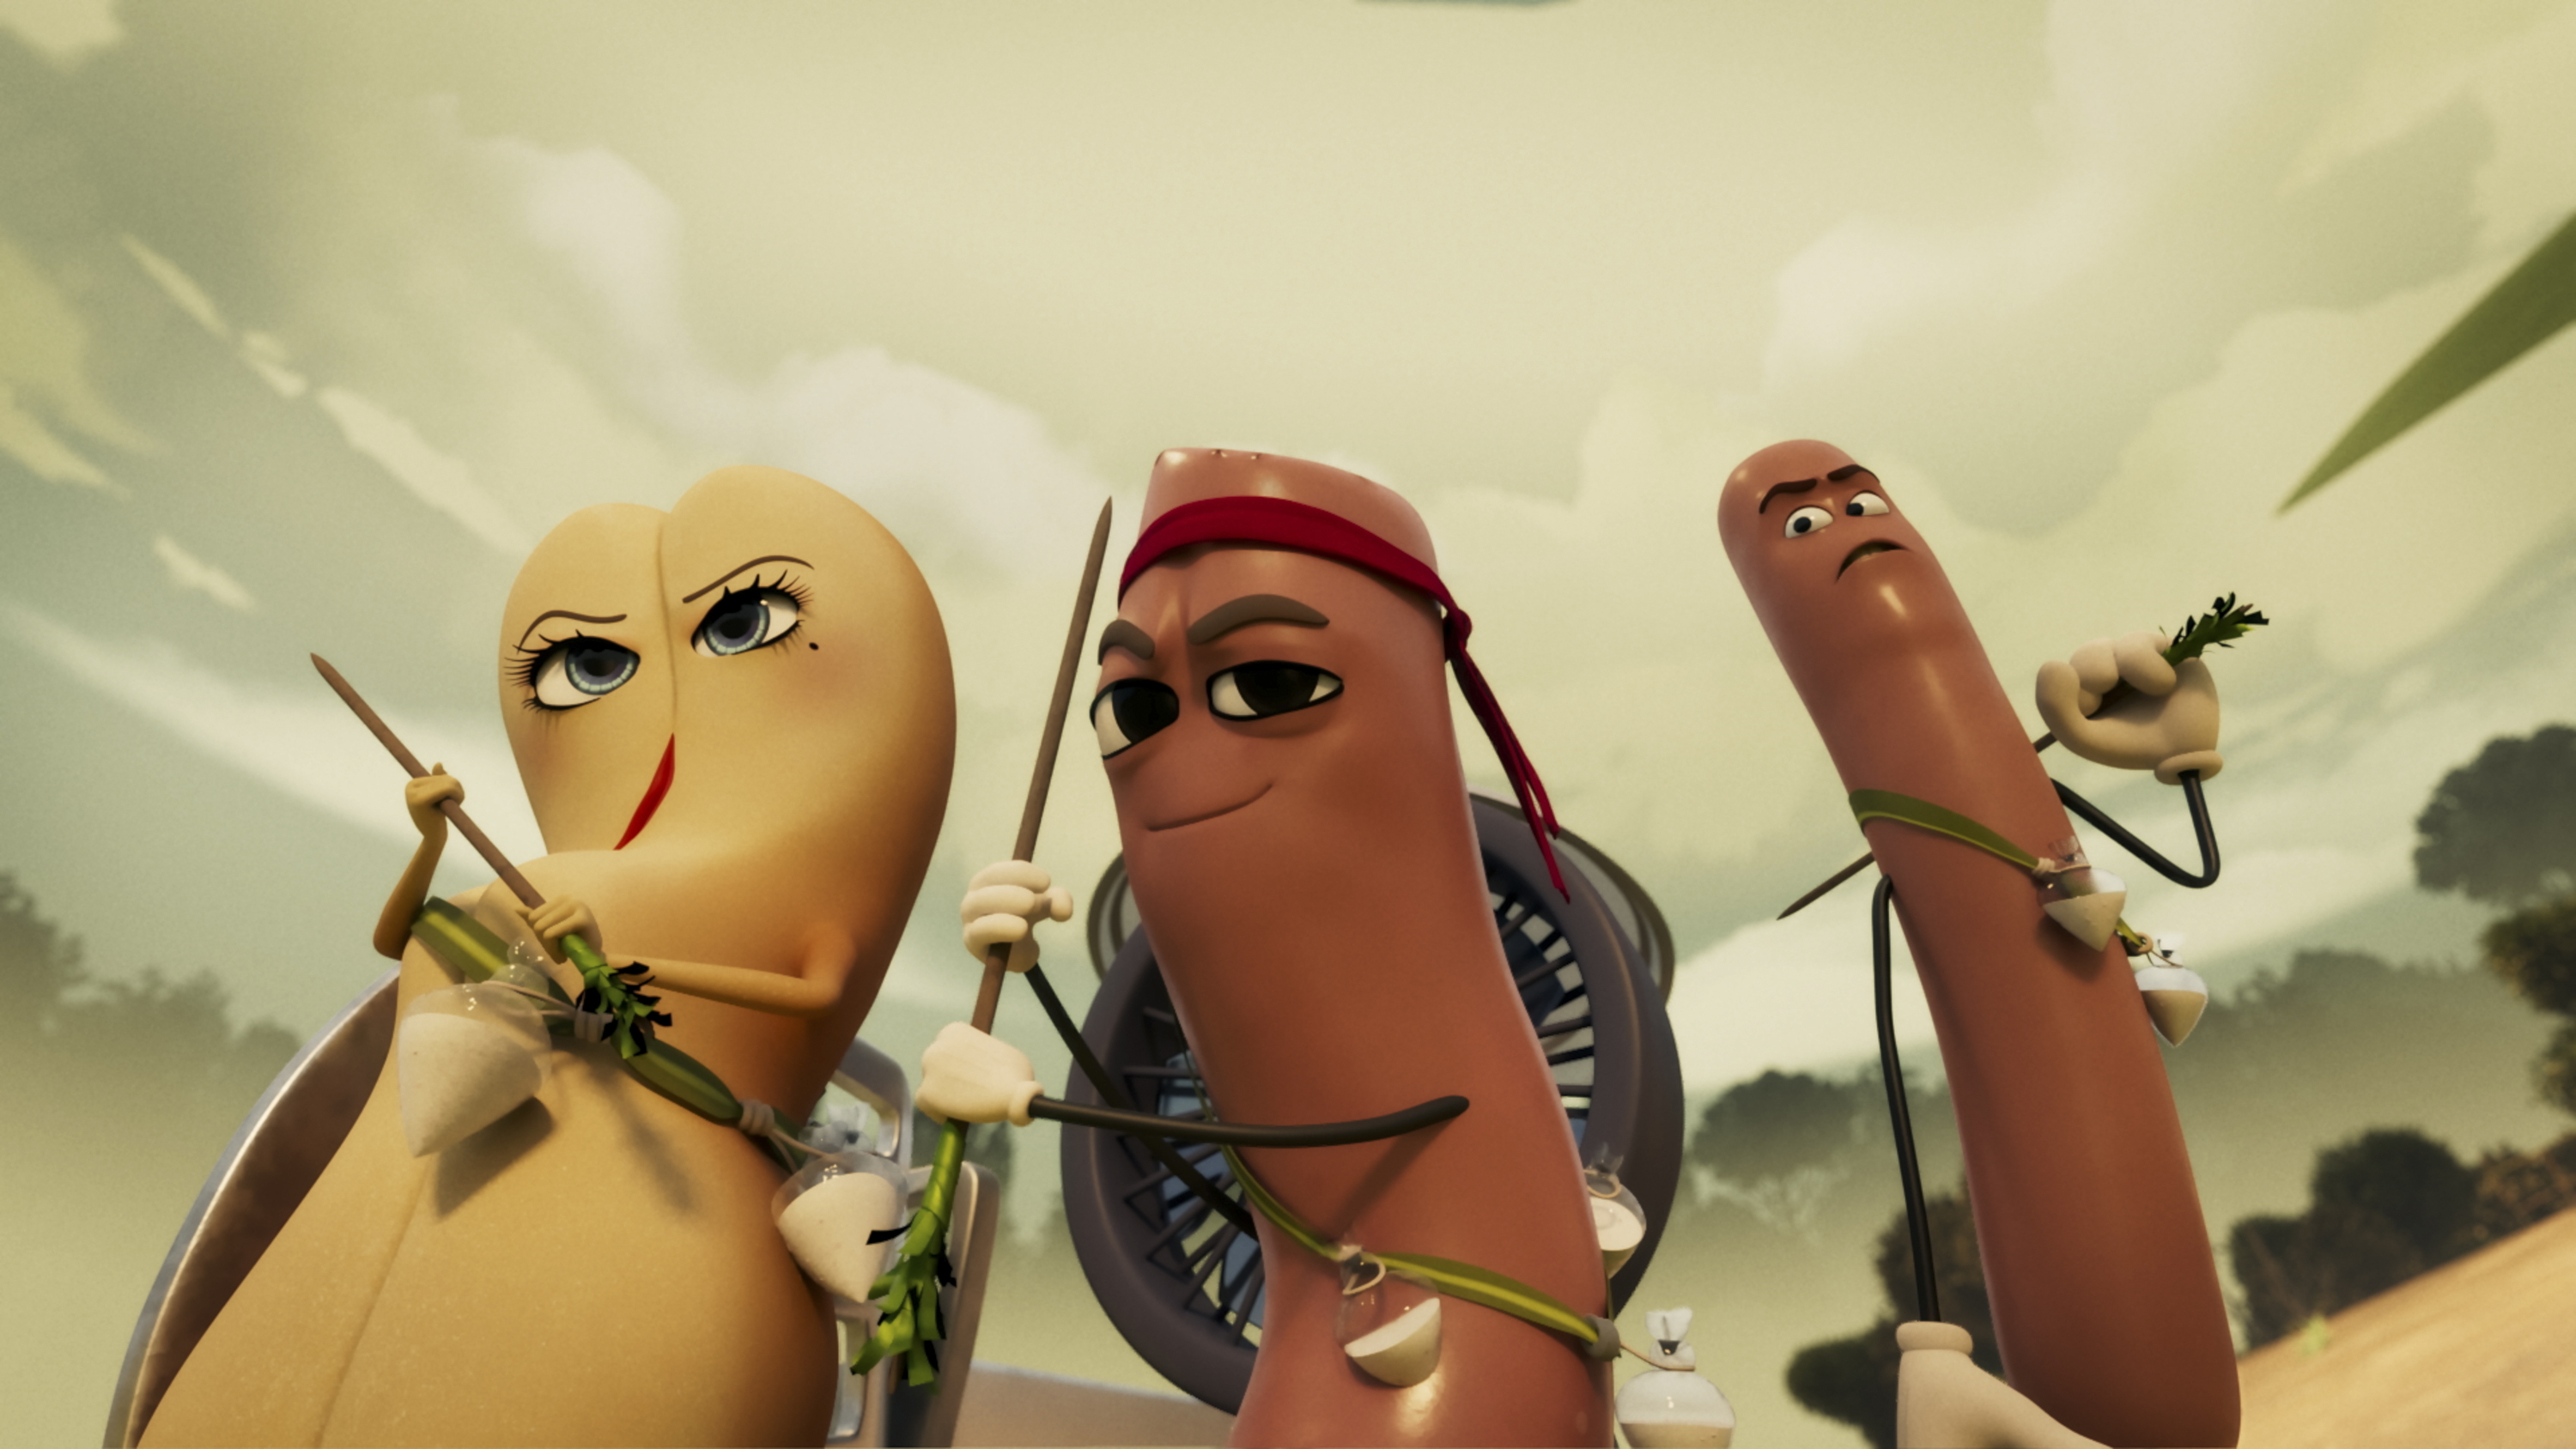 Prime Video have released the official trailer for the upcoming animated series Sausage Party: Foodtopia.